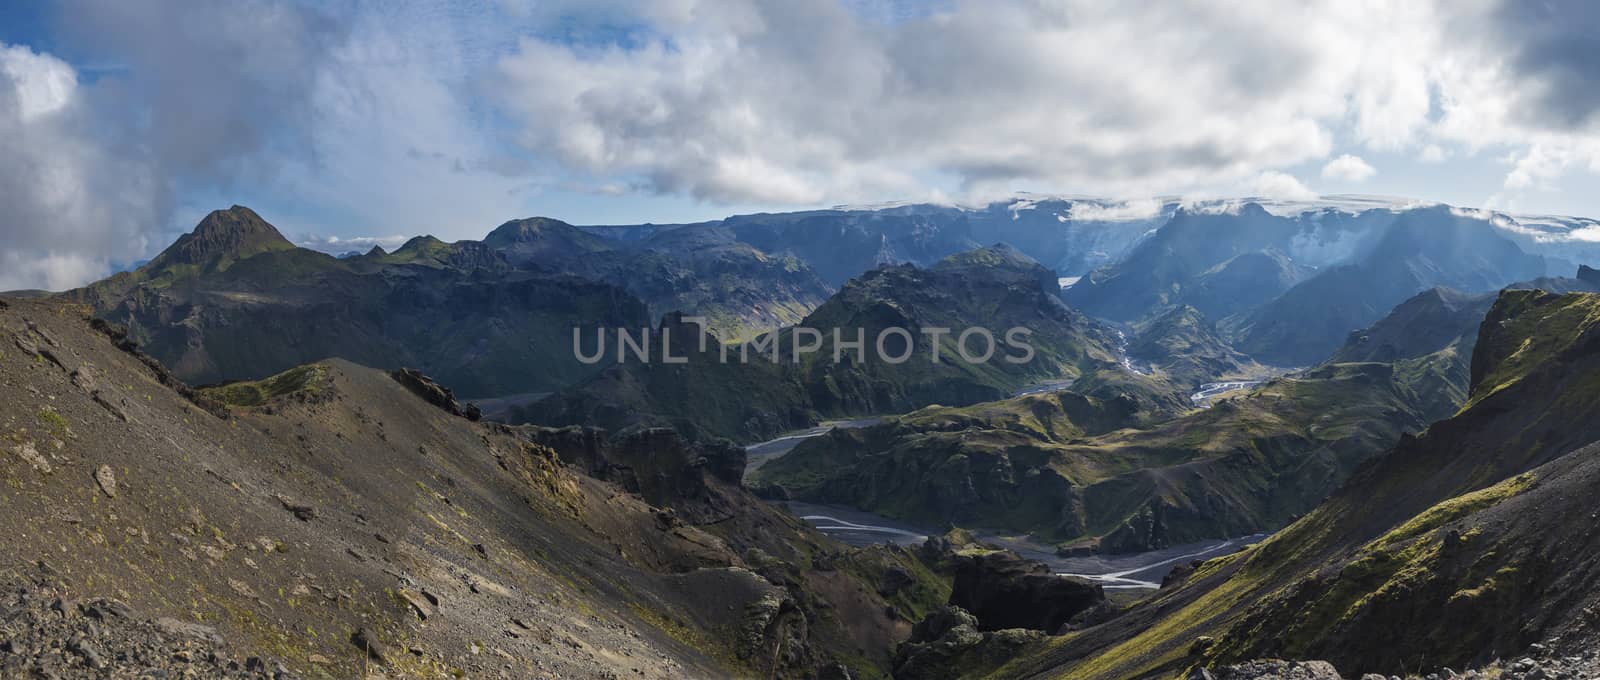 Panoramic breathtaking view on Landscape of Godland and thorsmork with rugged green moss covered rocks and hills, bending river canyon, Iceland, Fimmvorduhals hiking trail. Summer cloudy day